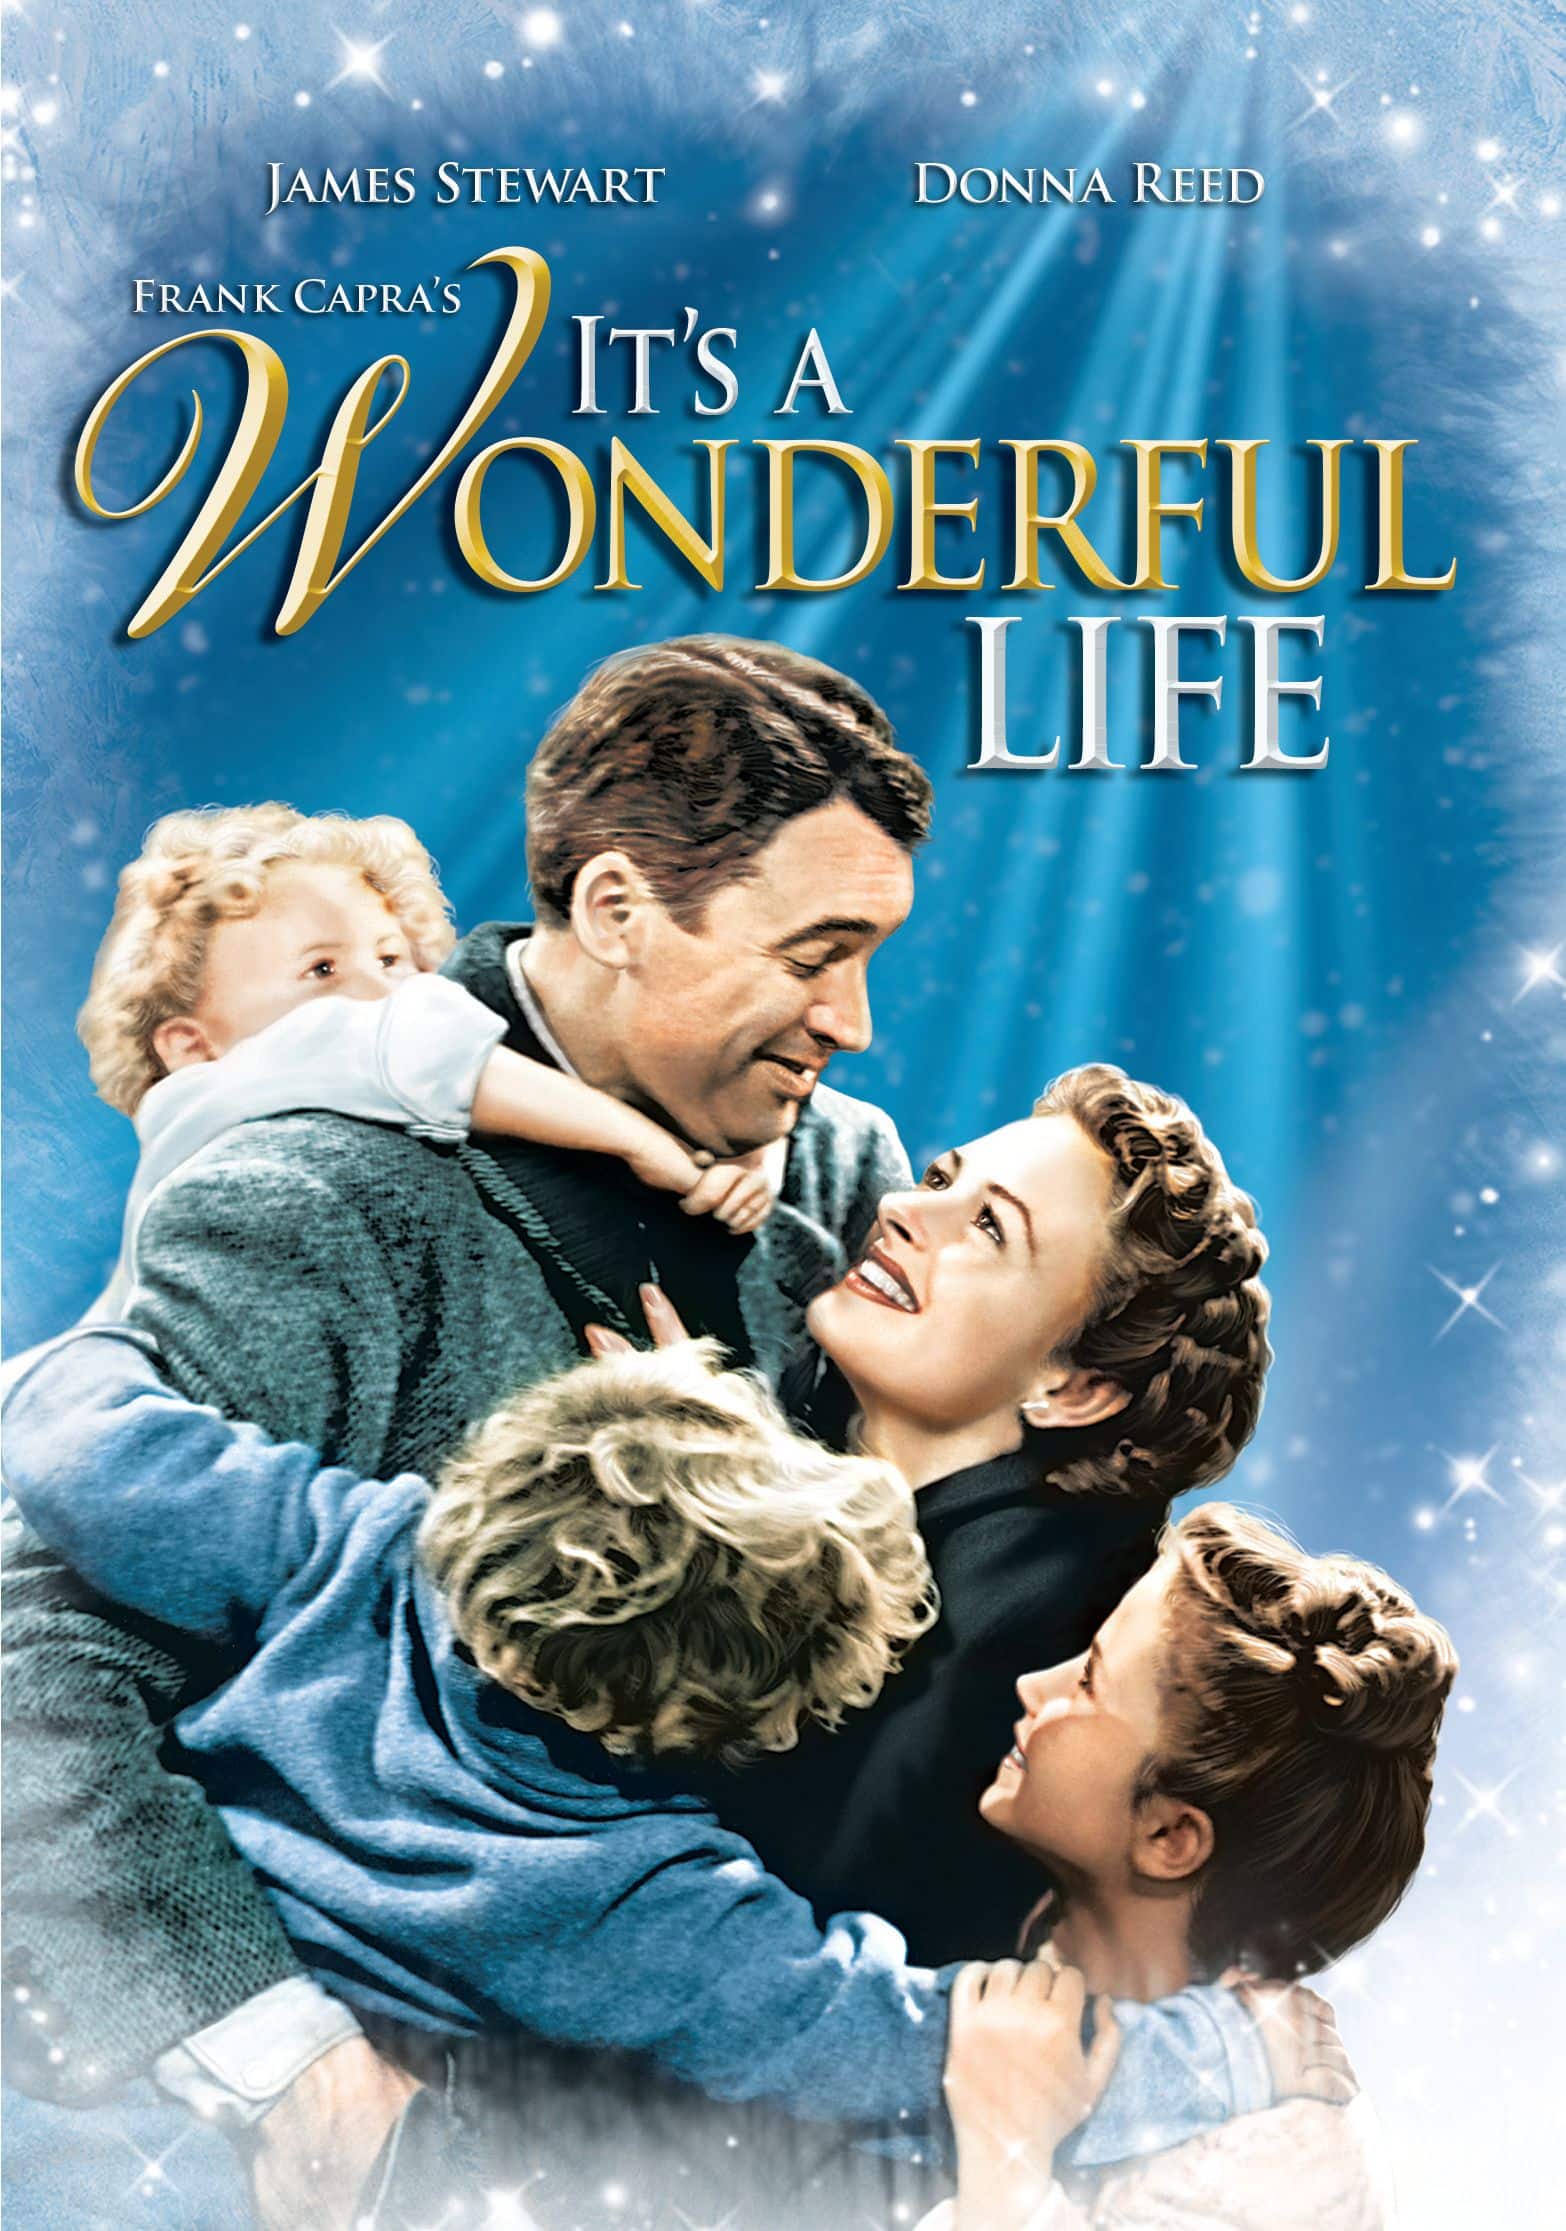 It's a Wonderful Life showing in downtown Franklin at The Franklin Theatre.